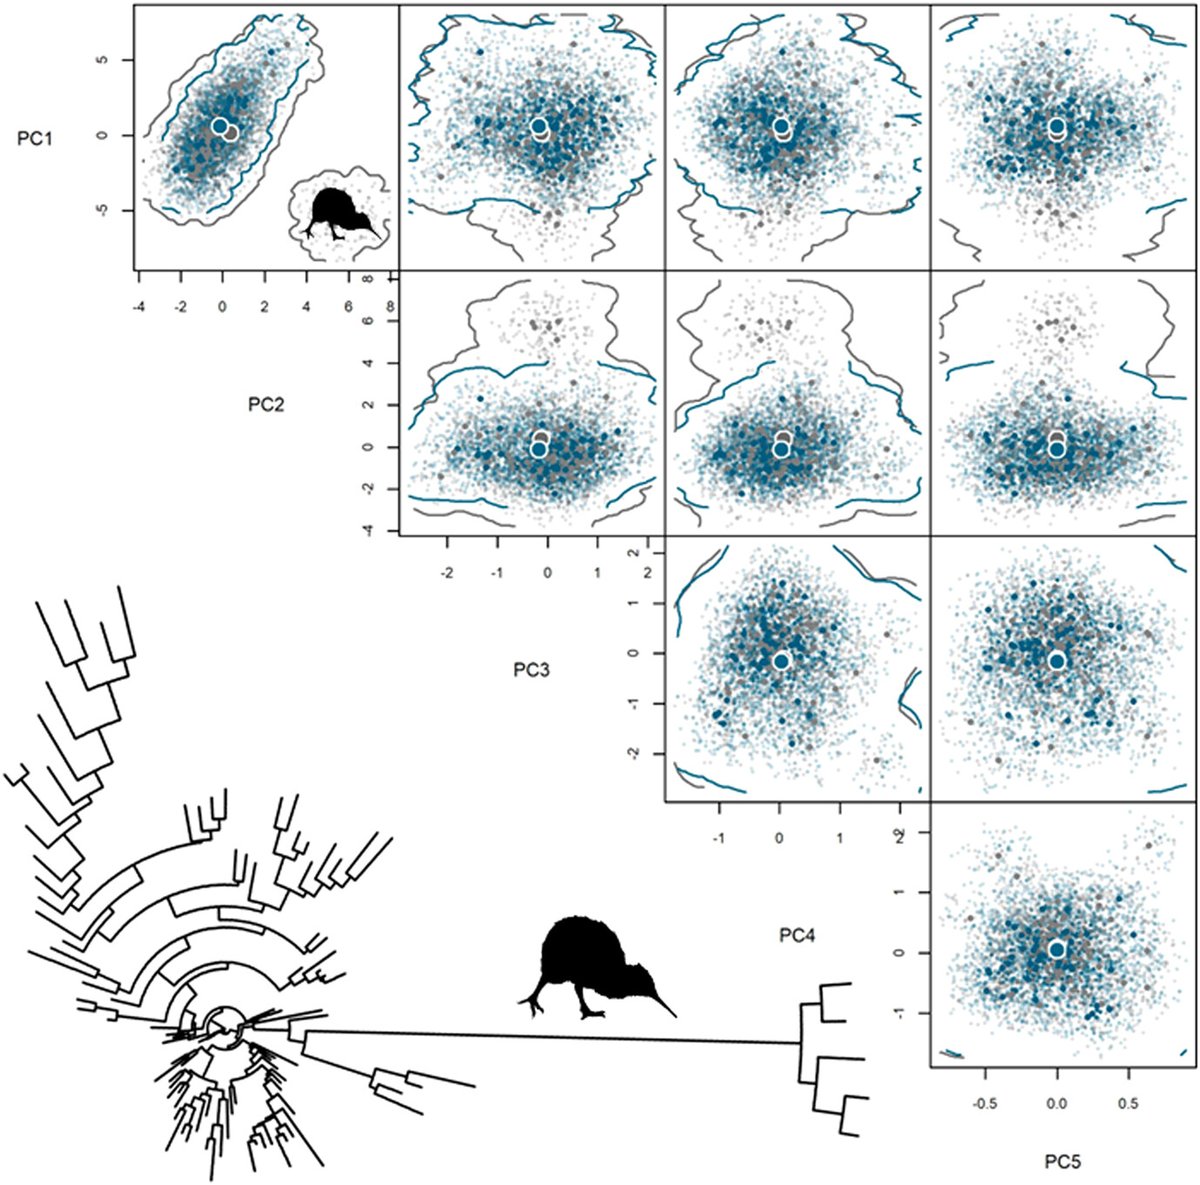 Calculating functional diversity metrics using neighbor-joining trees nsojournals.onlinelibrary.wiley.com/doi/10.1111/ec… #dendrograms #functional_diversity #FD @NordicOikos @WileyEcolEvol